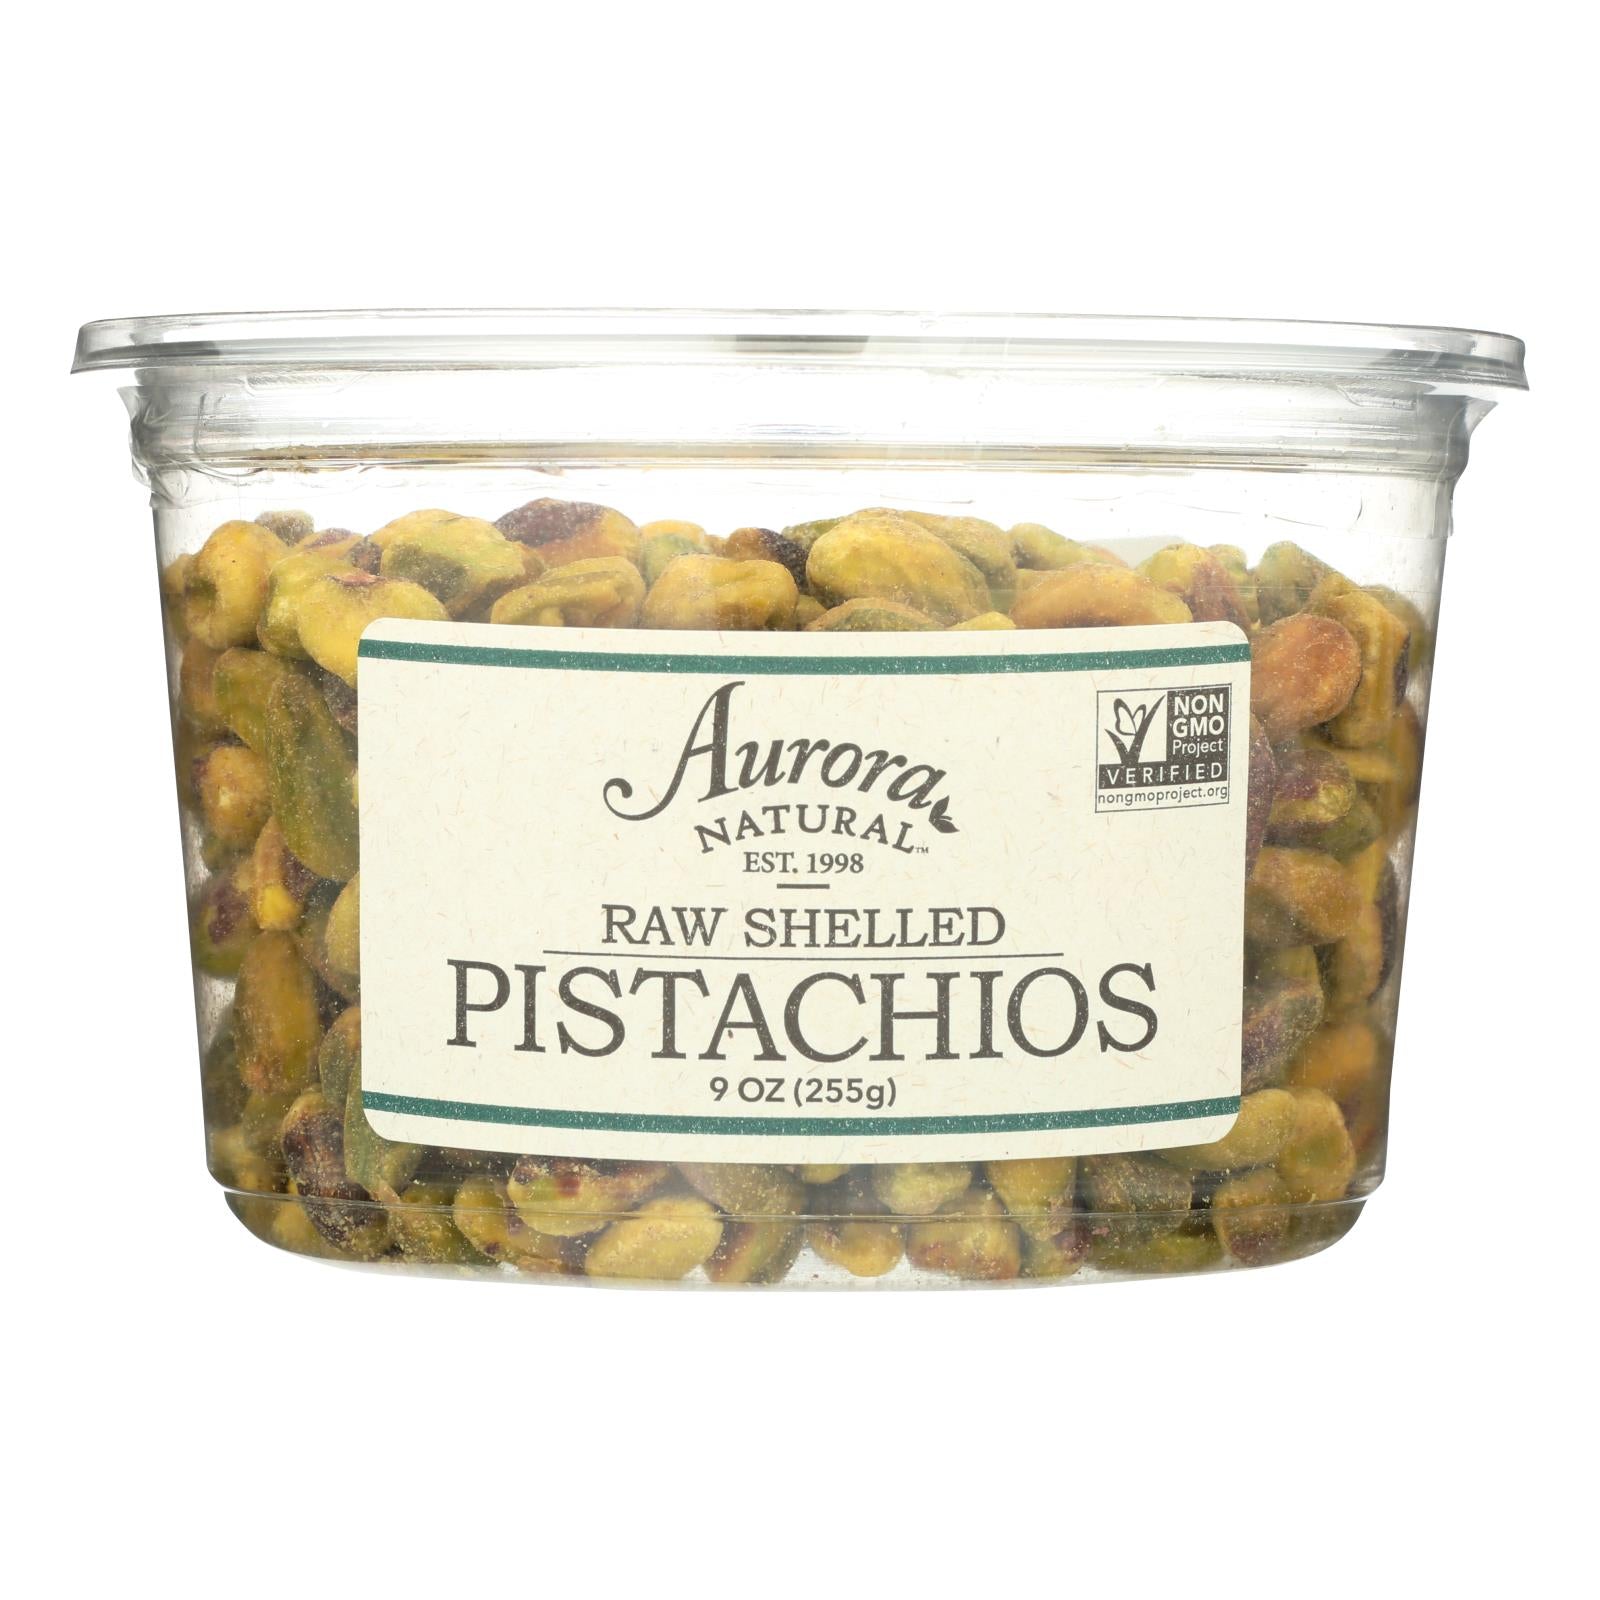 Aurora Natural Products, Aurora Natural Products - Raw Shelled Pistachios - Case of 12 - 9 oz. (Pack of 12)